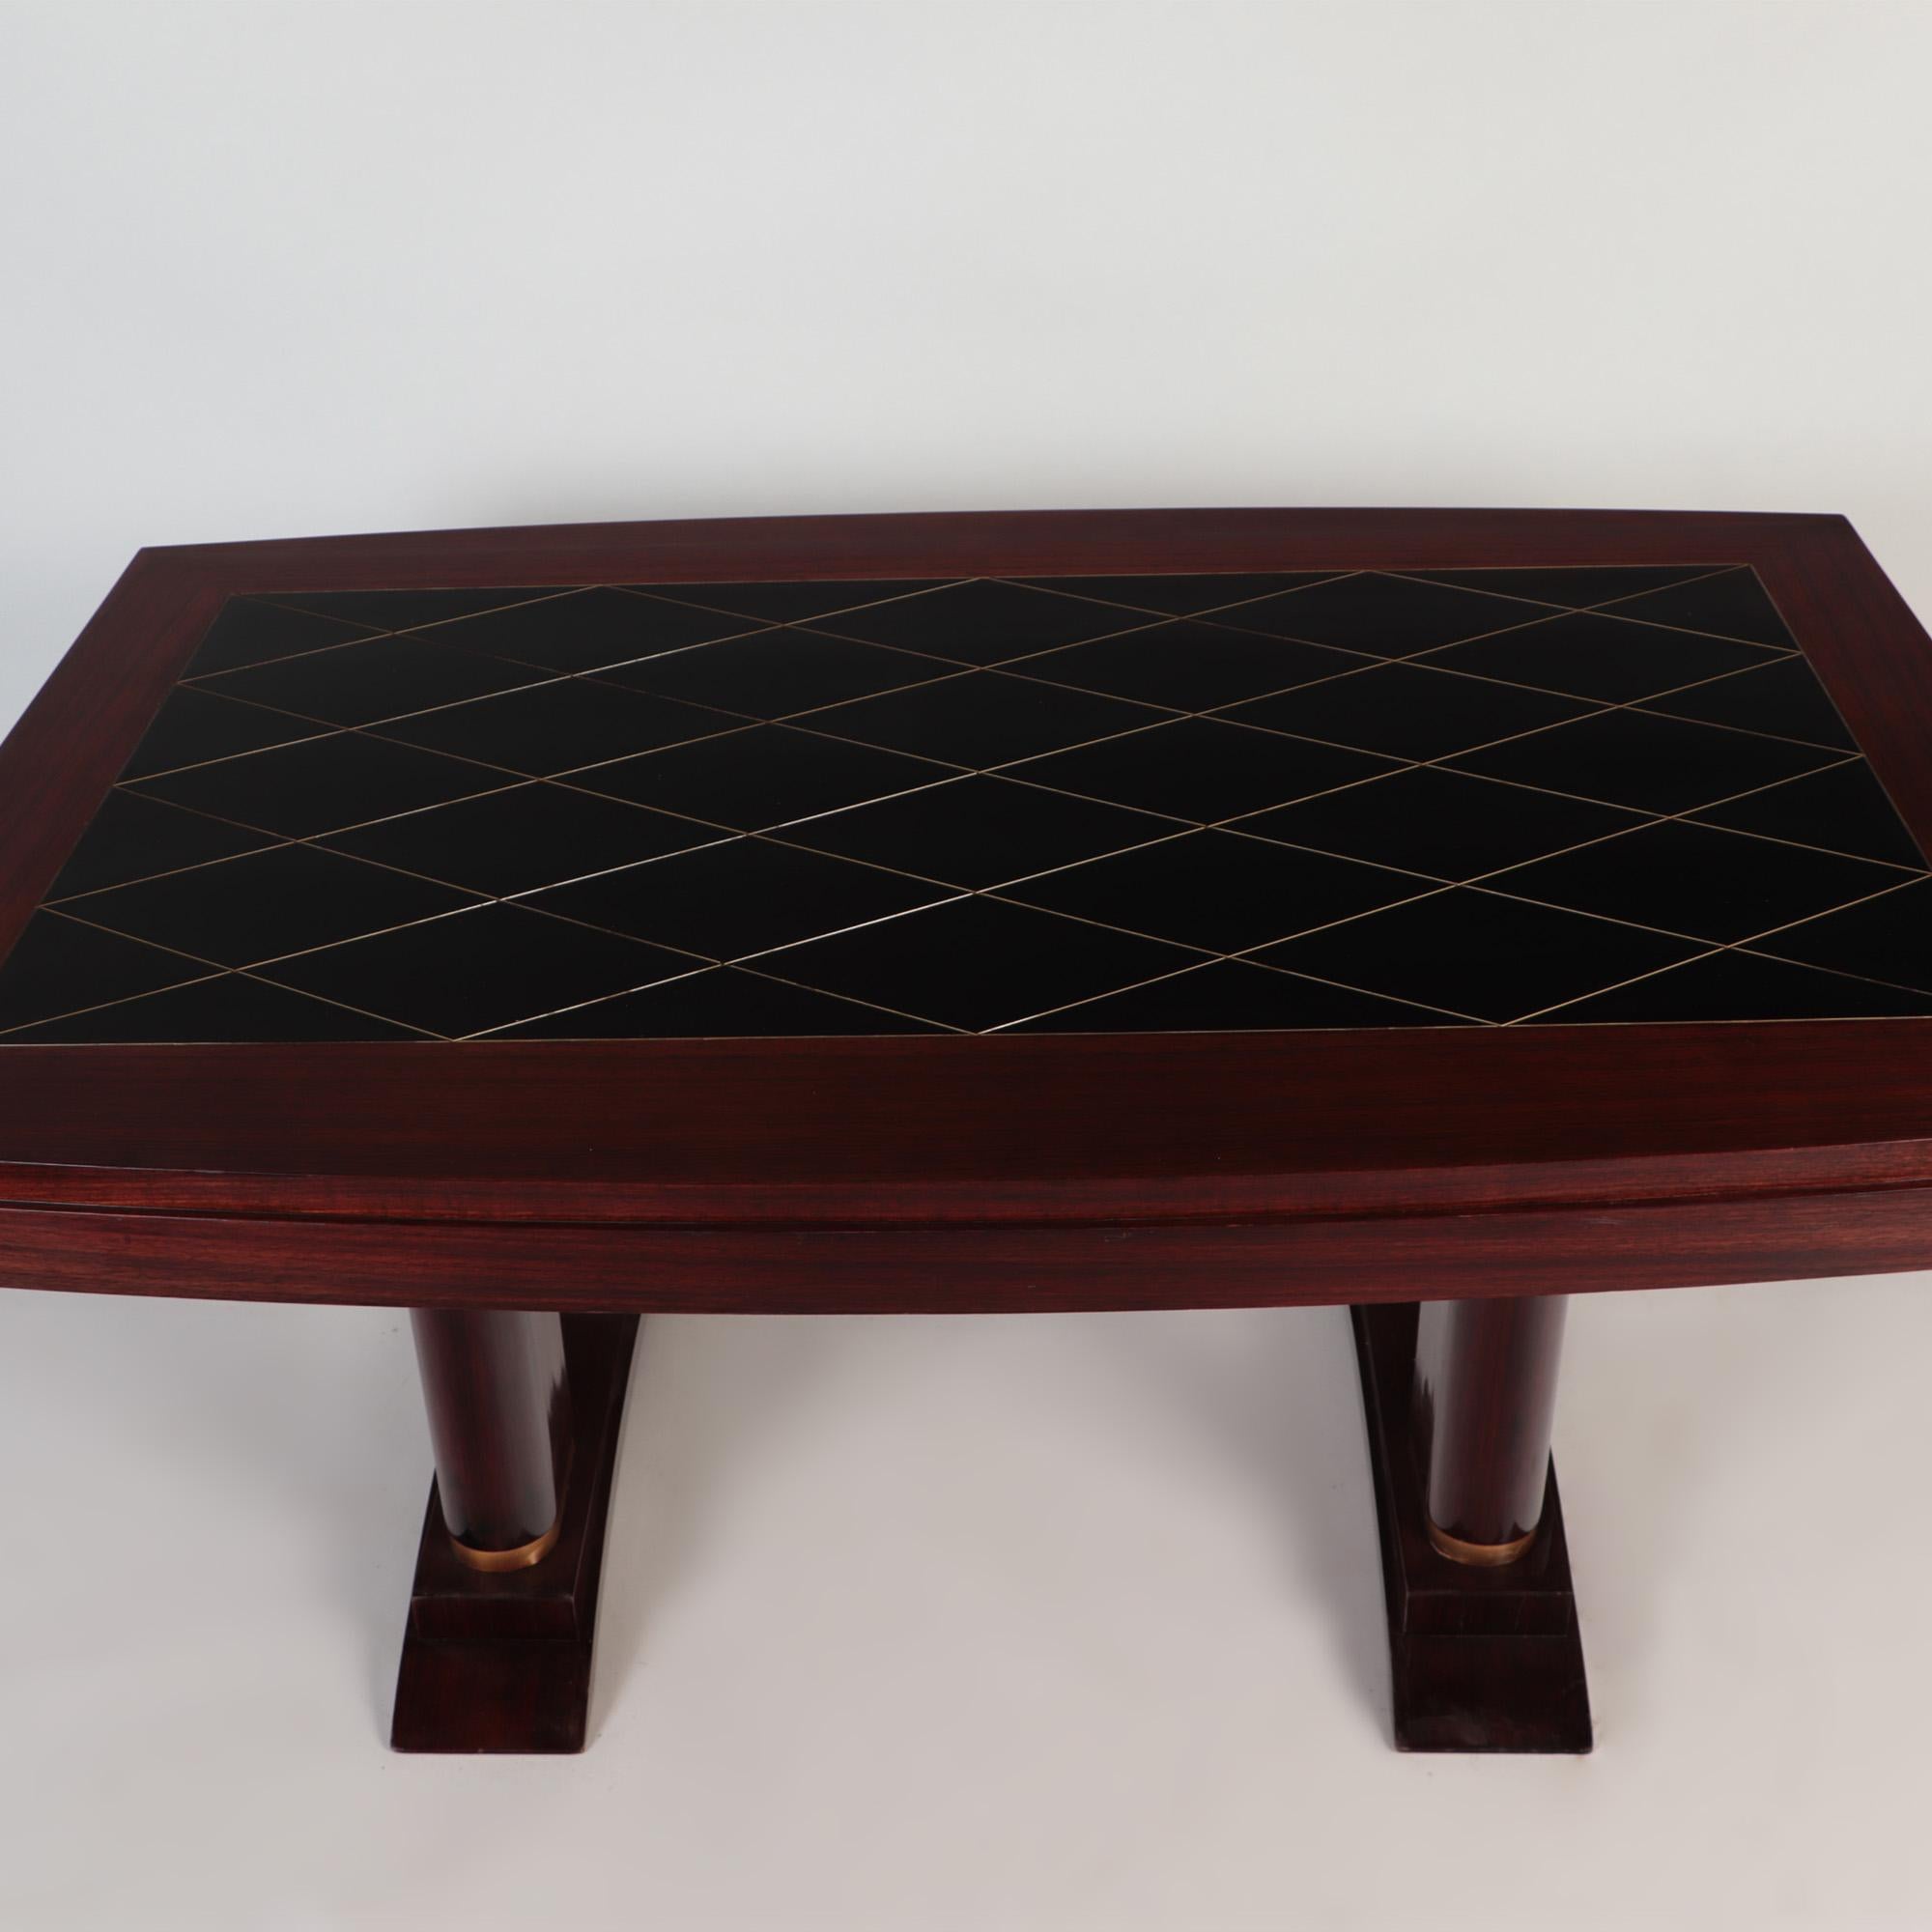 A French mahogany Art Deco dining table with brass details by Robert Desnos for Editions AV, one drawer on each side, circa 1930.